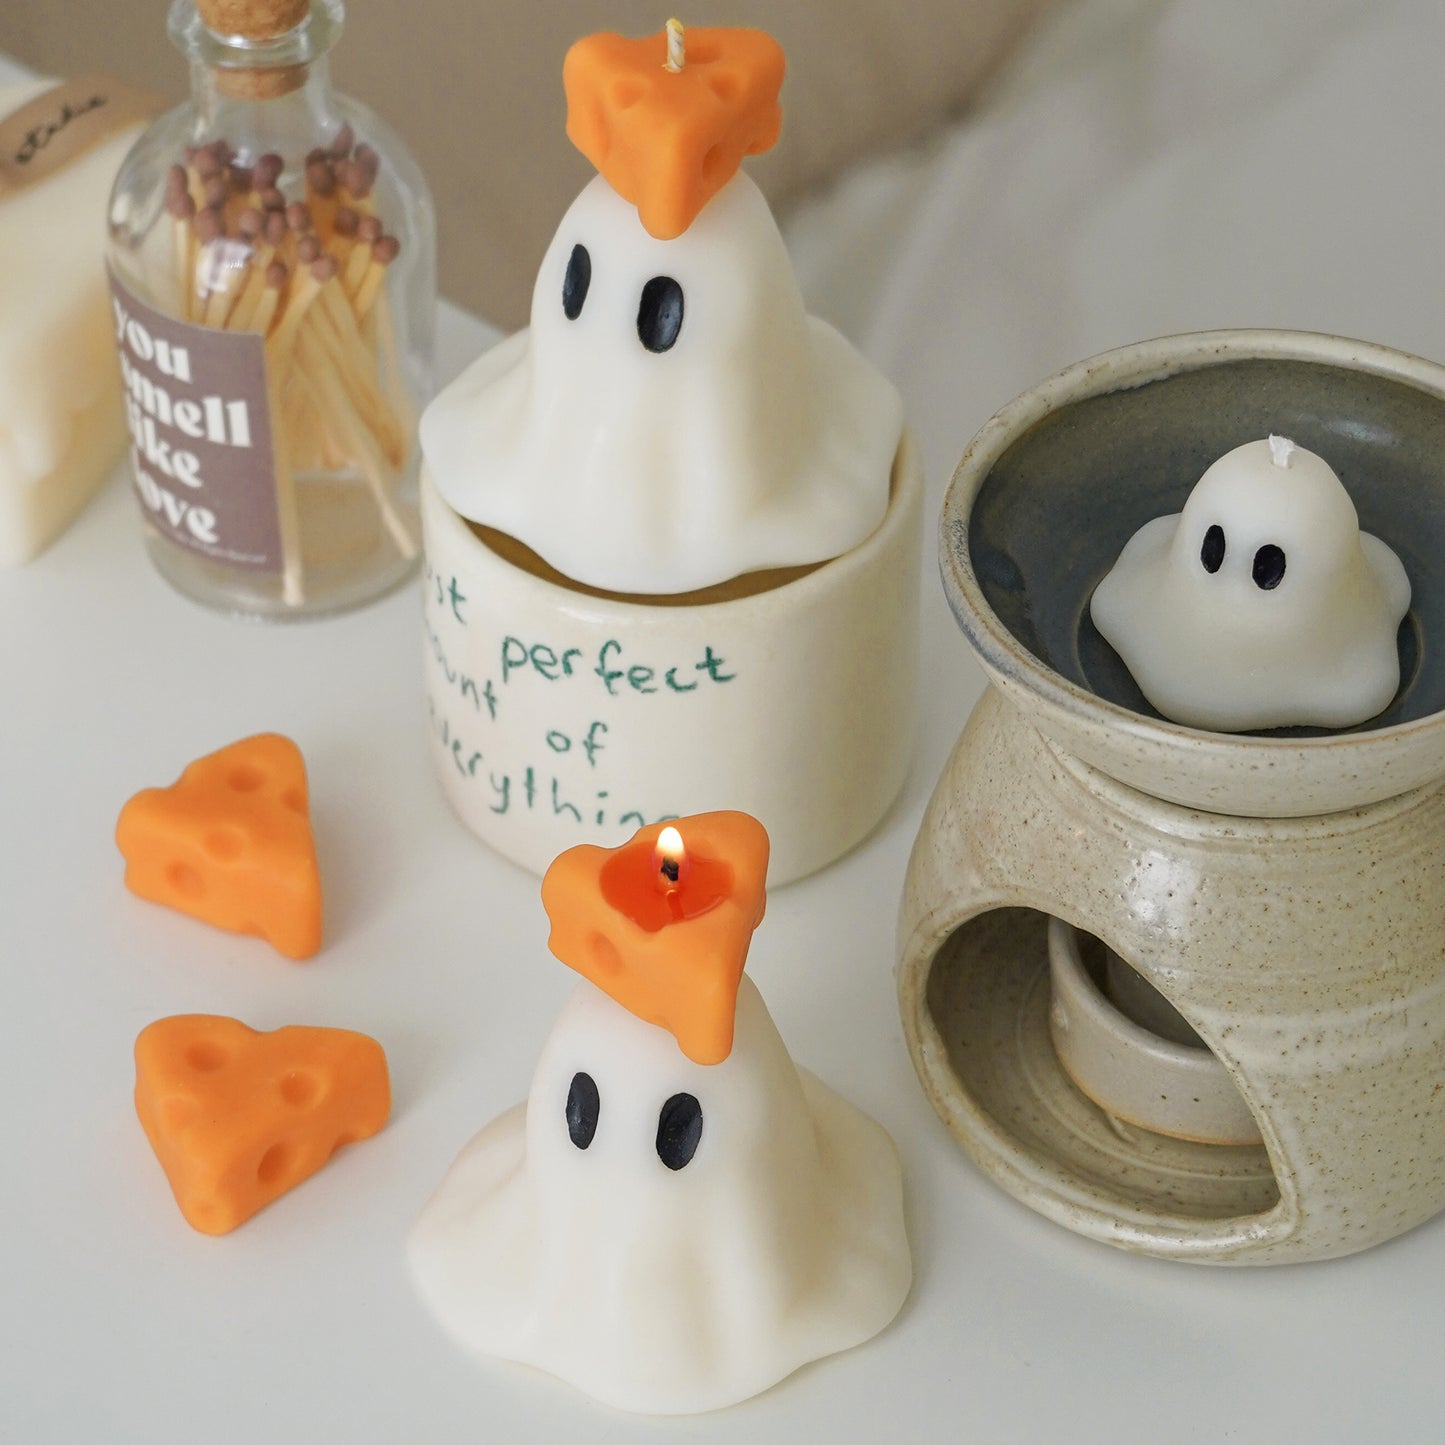 ghost candles with cheese on top, cheese wax melts, wax warmer, mug, and match bottle on a vanity table